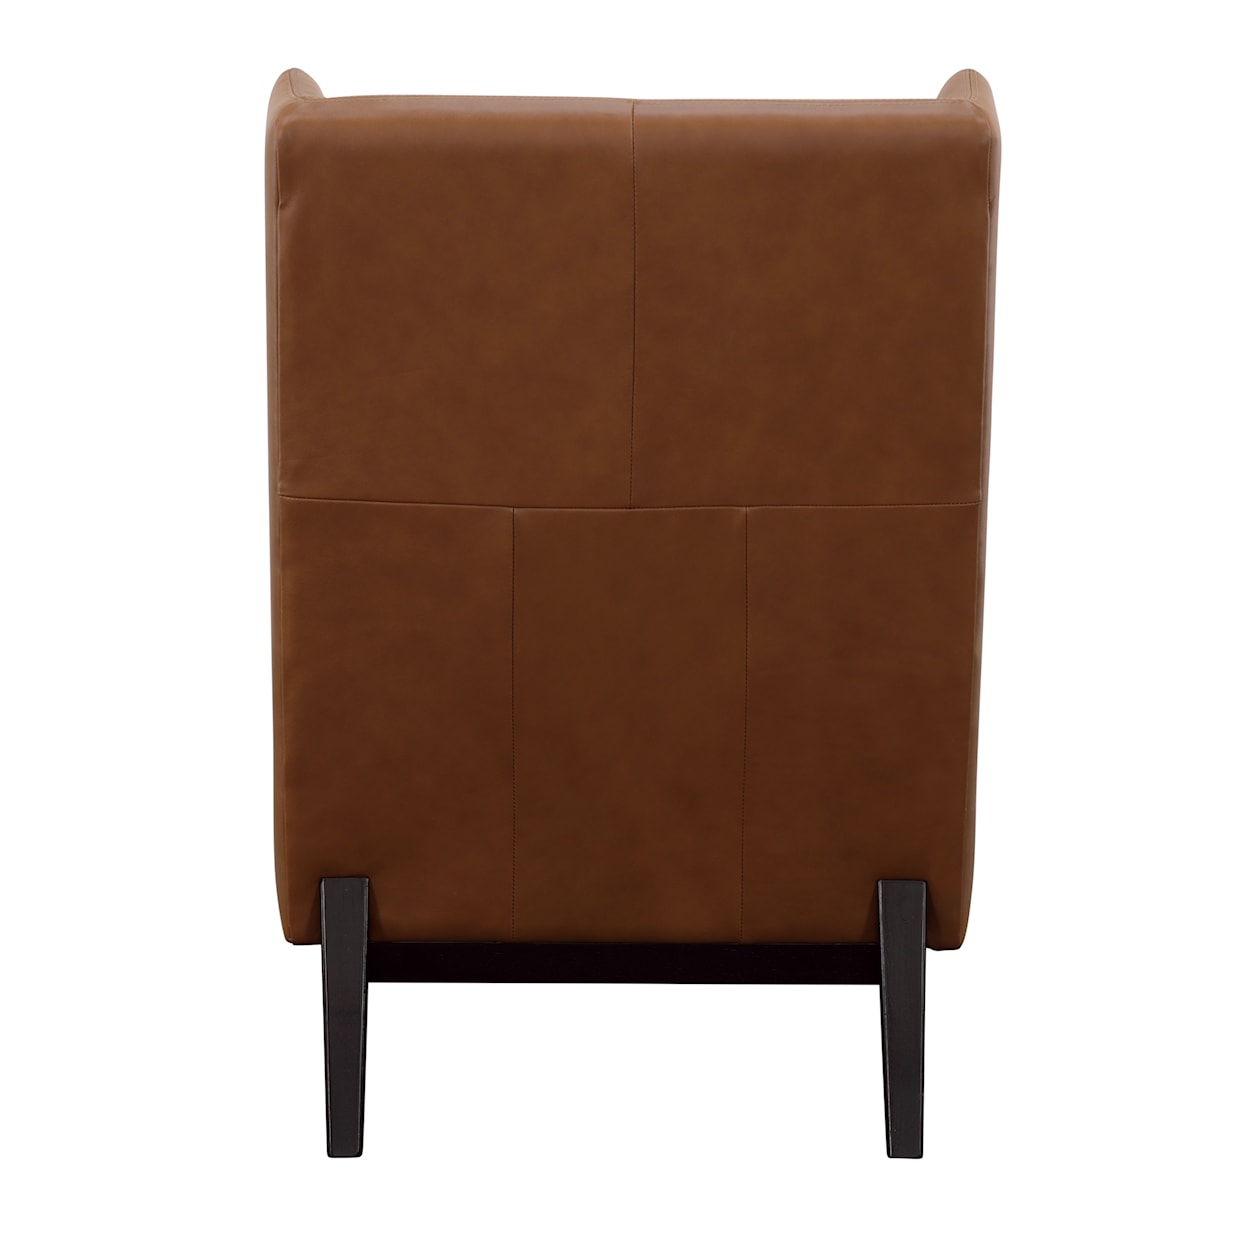 C2C Coast to Coast Imports Accent Chair